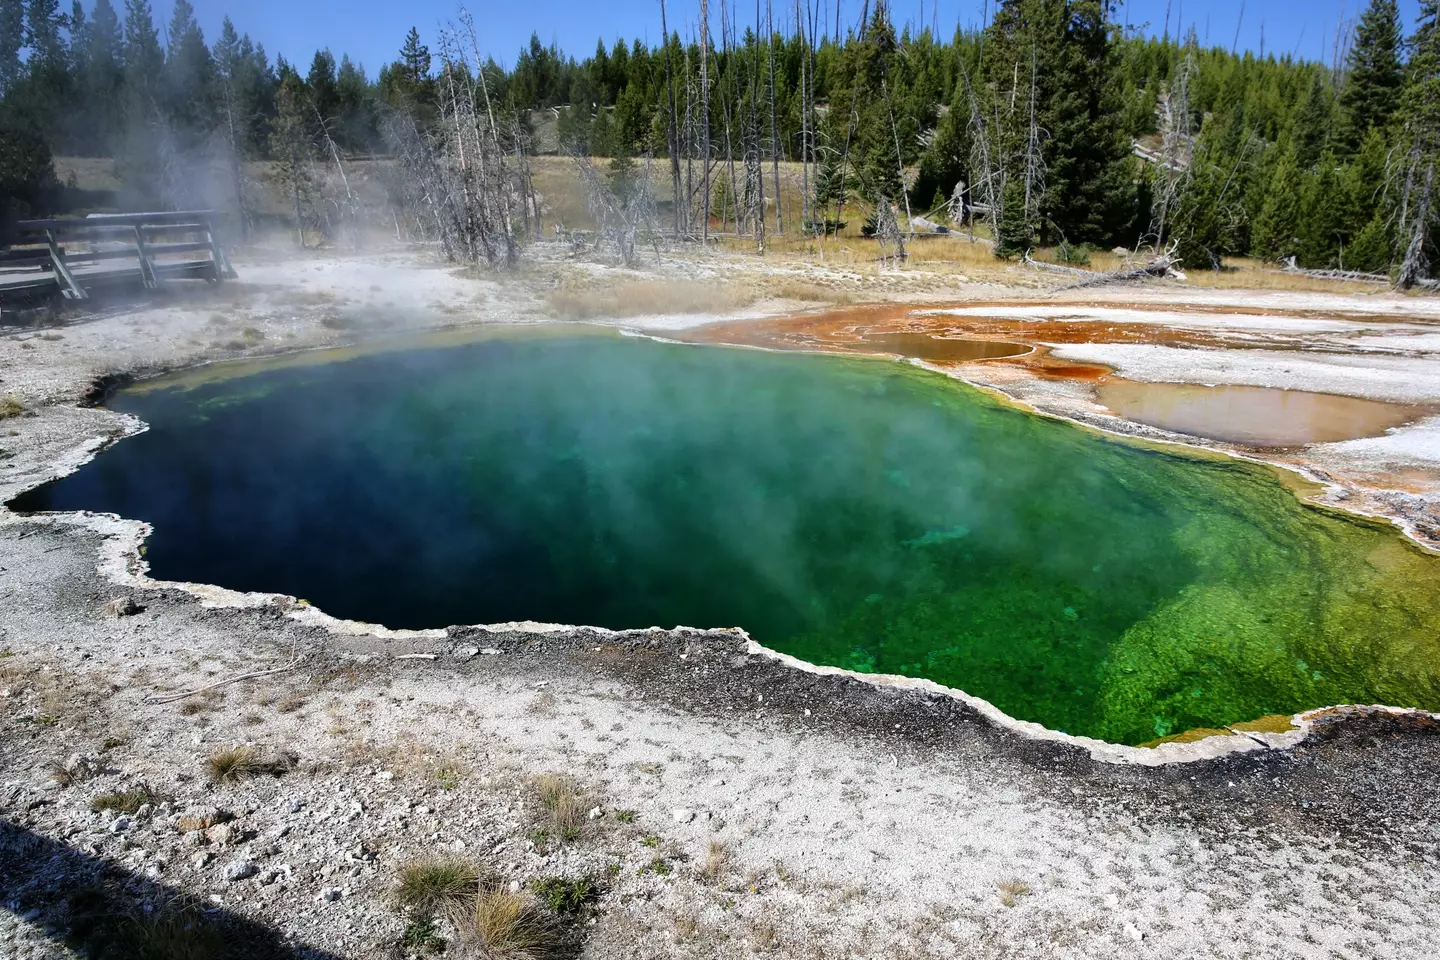 Part of a human foot has been found in Yellowstone National Park.